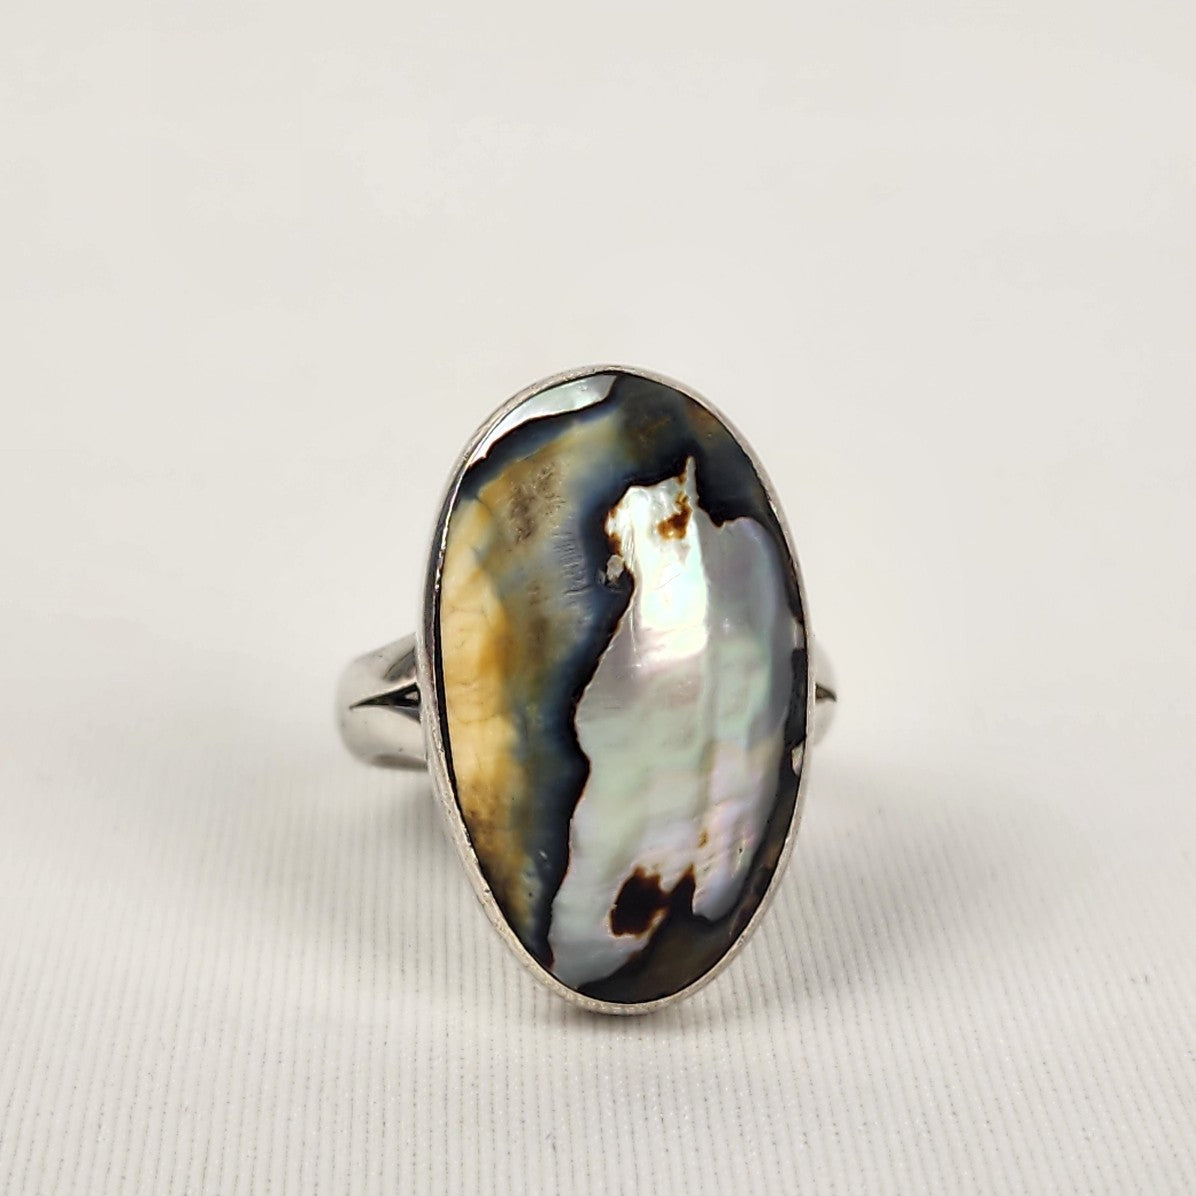 925 Sterling Silver Abalone Schell Ring Size 9